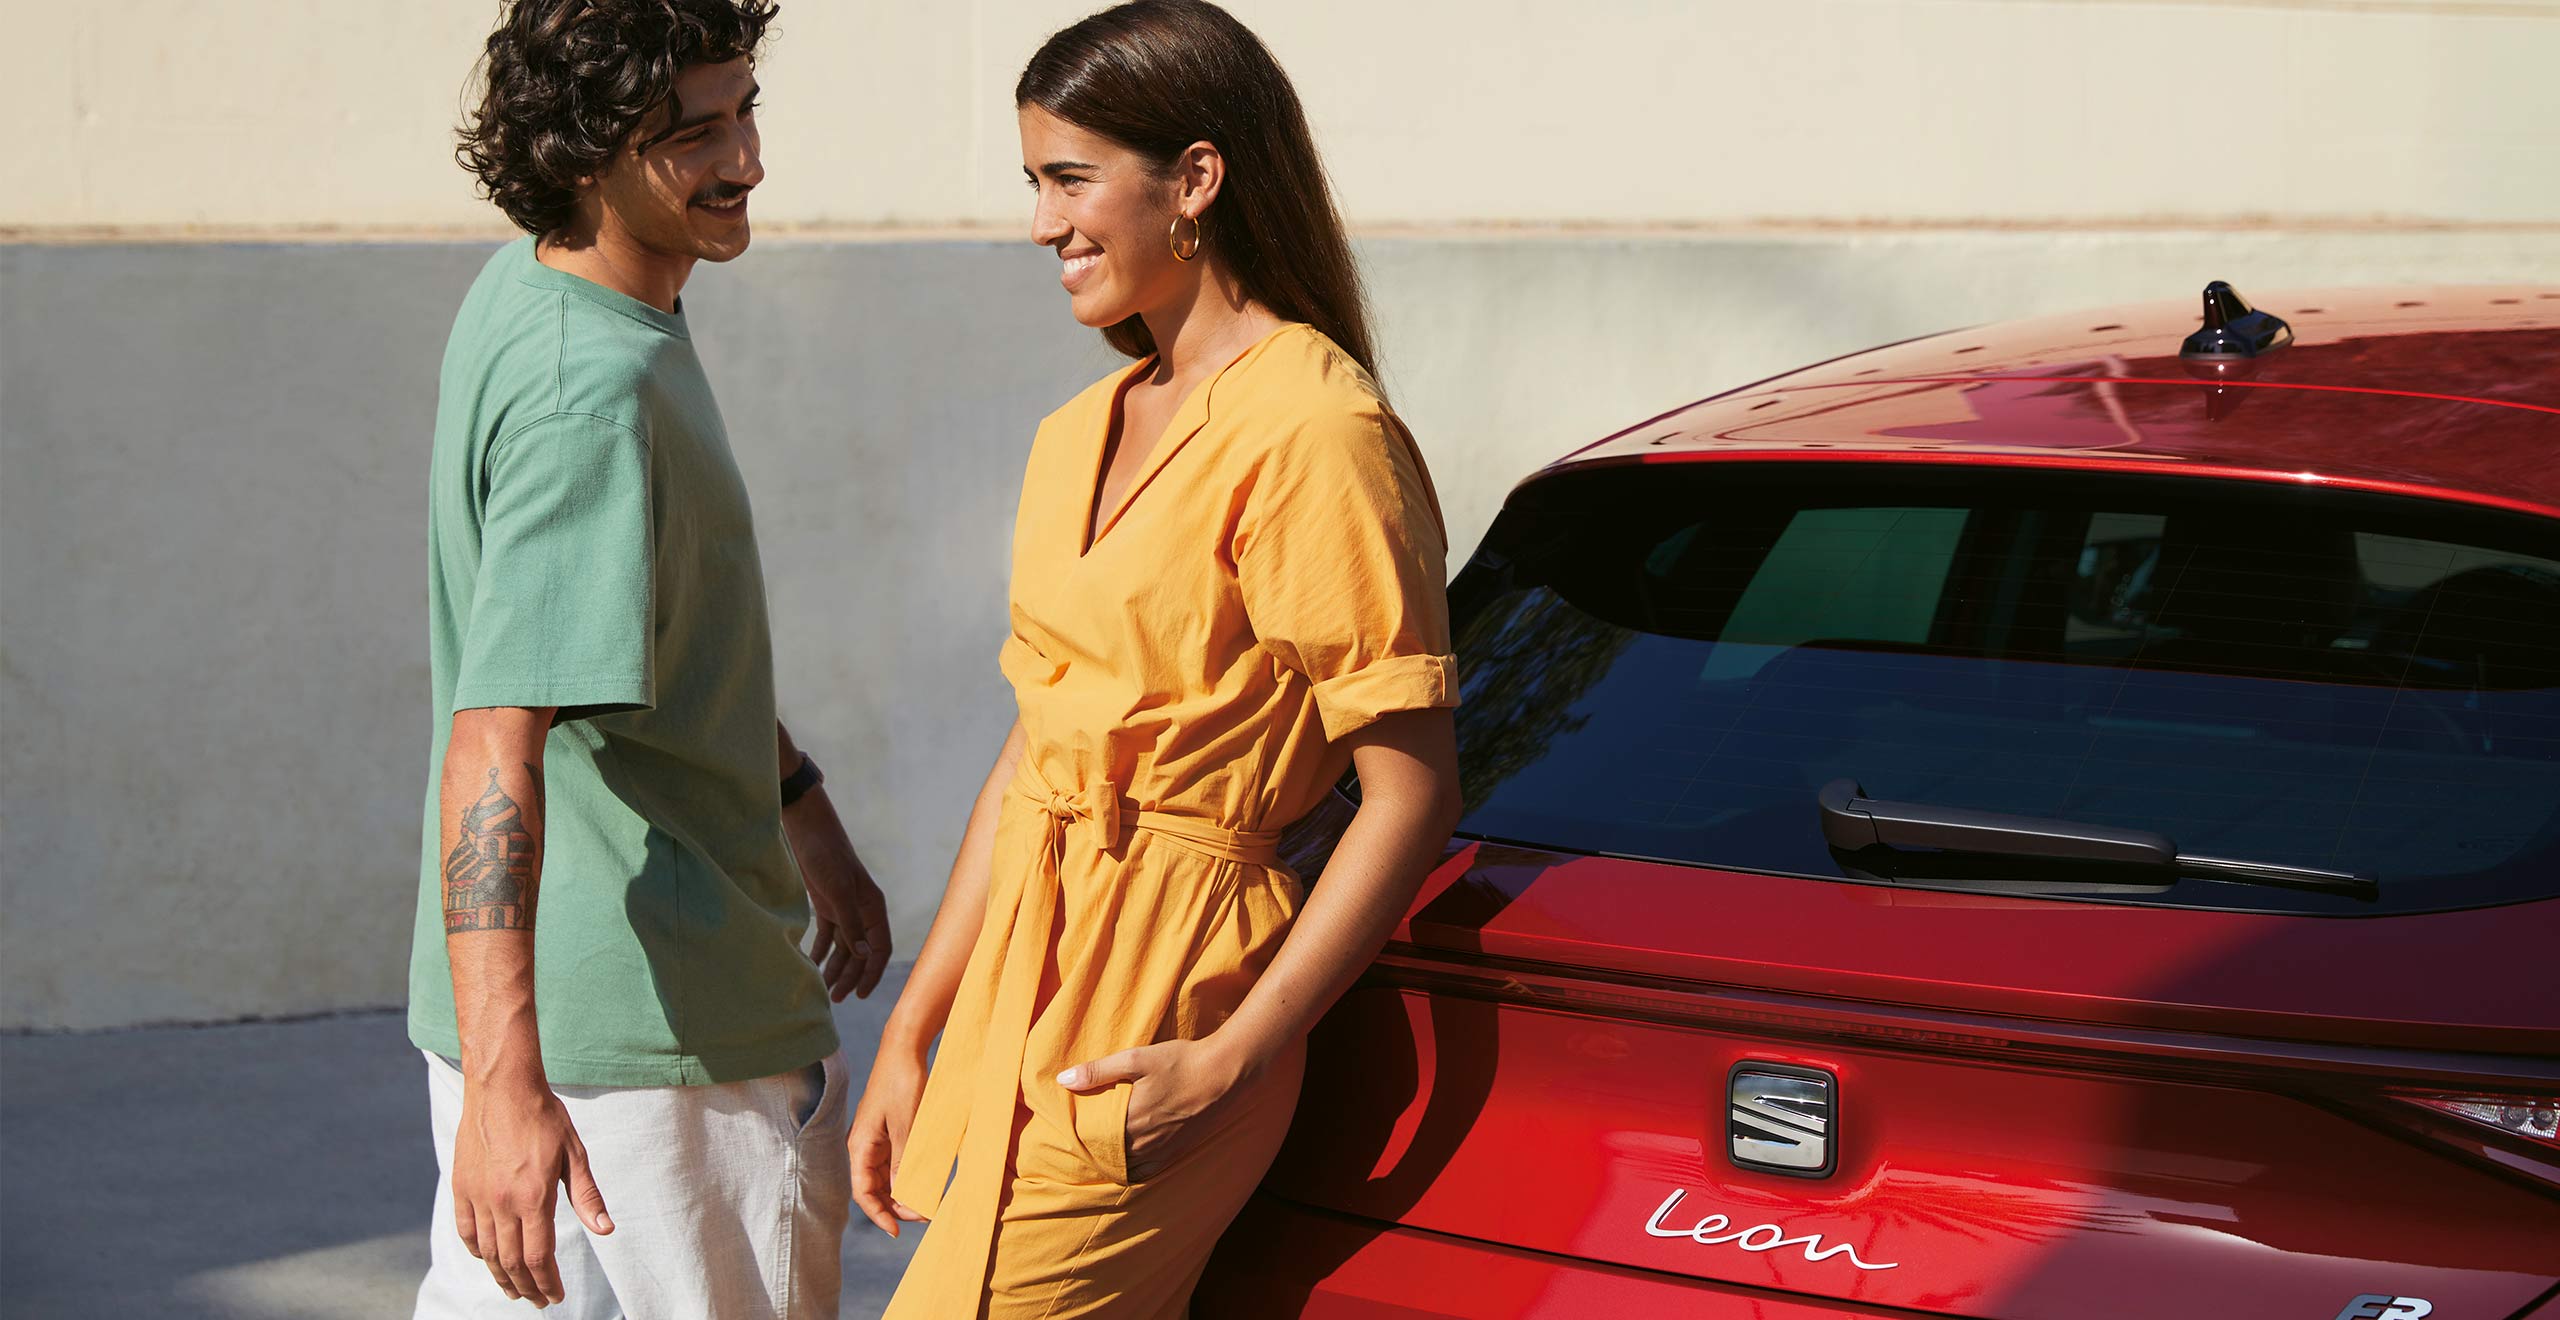 Couple talking next to a SEAT Leon desire red colour.